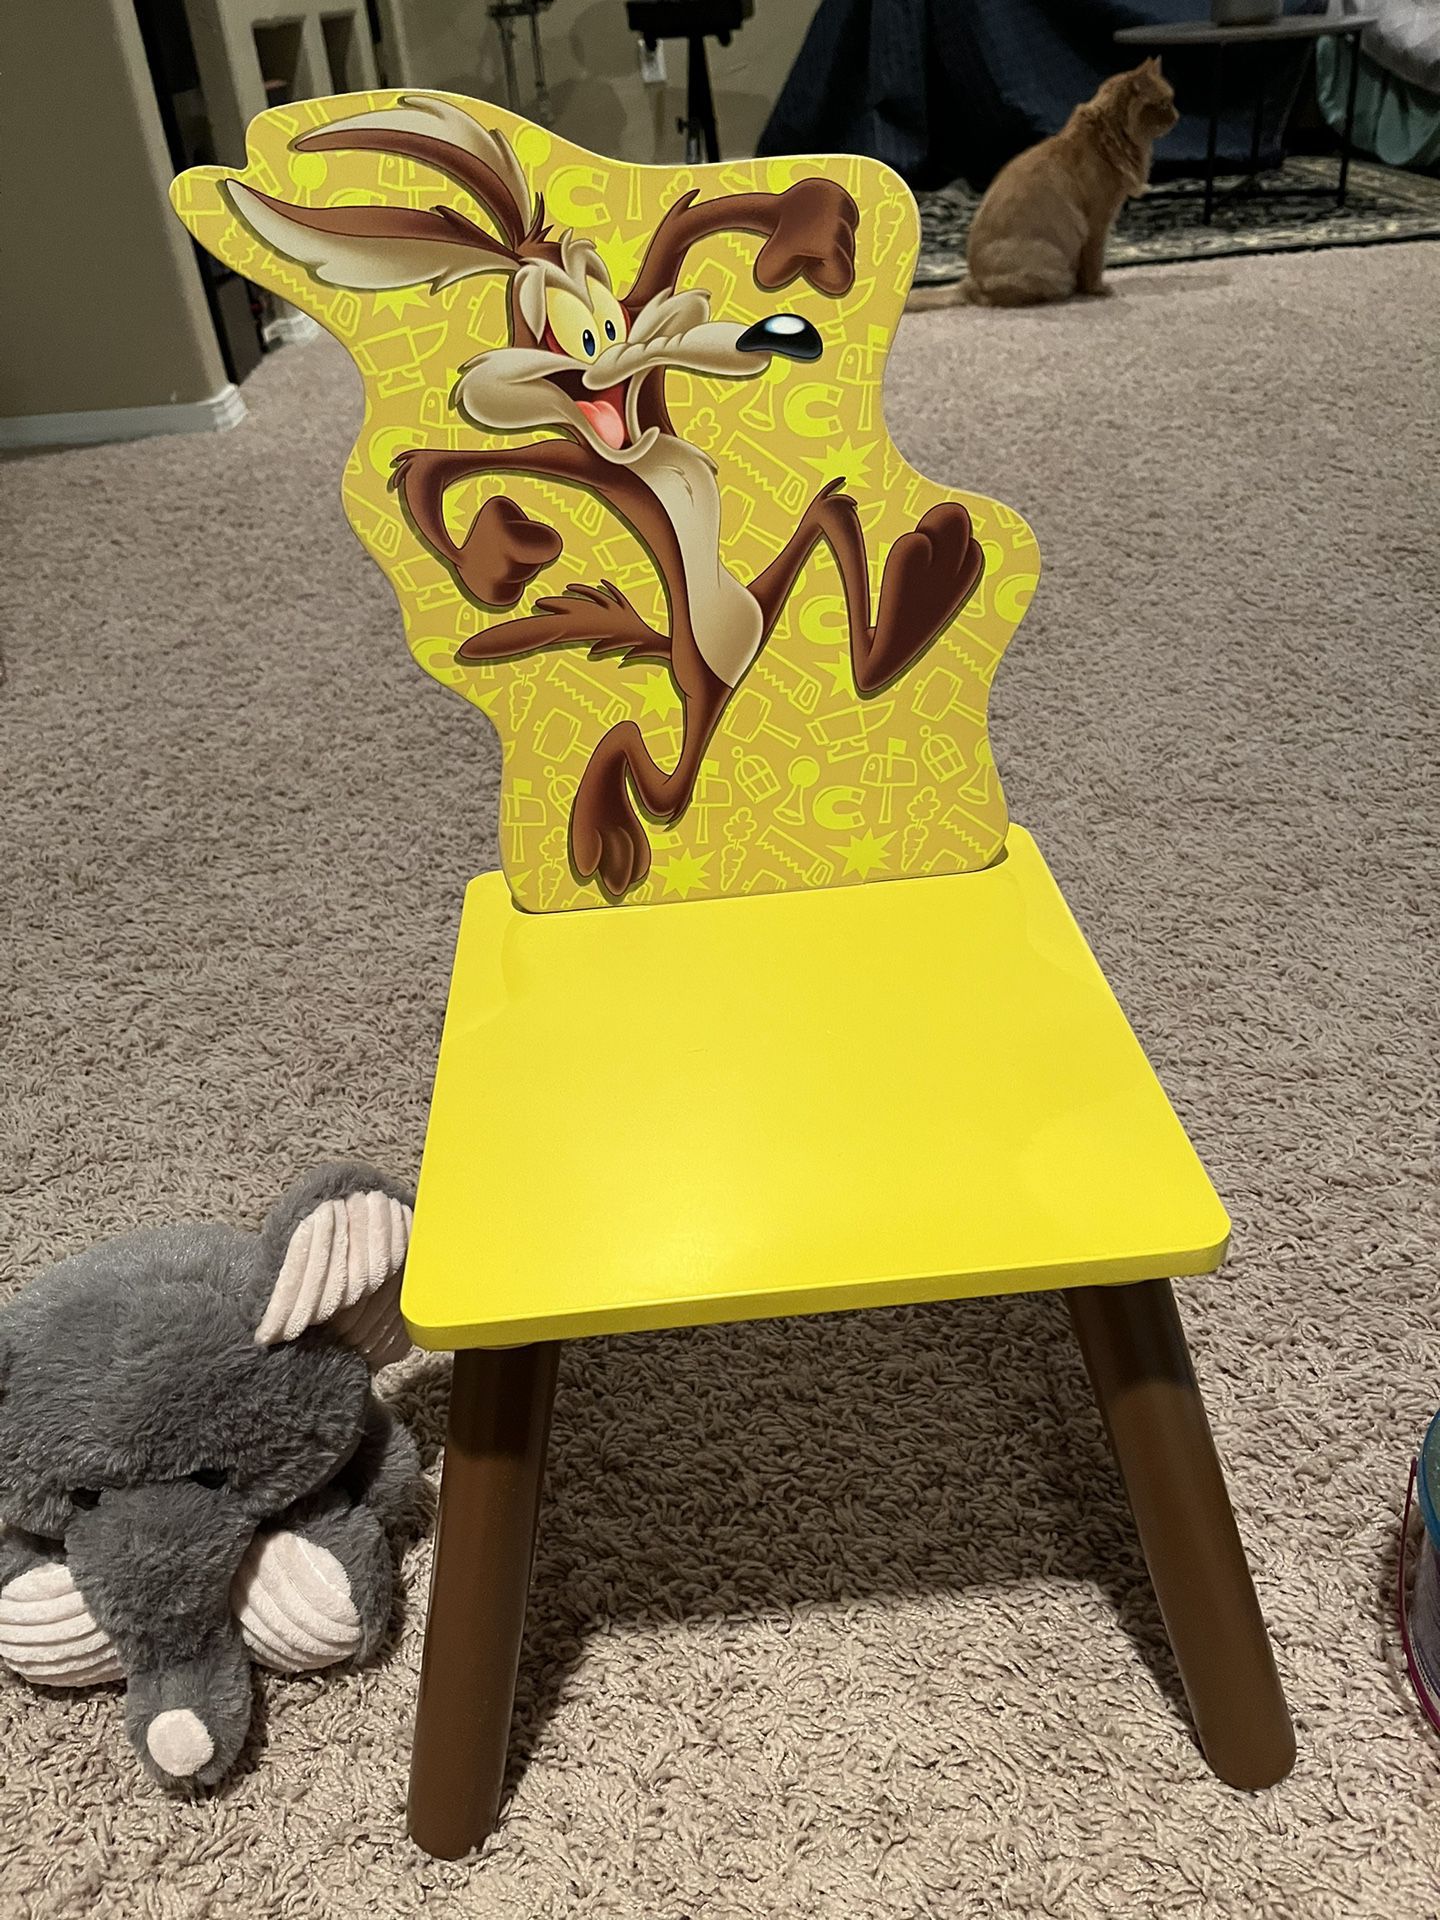 Wile E Coyote Toddler Wooden Chair 